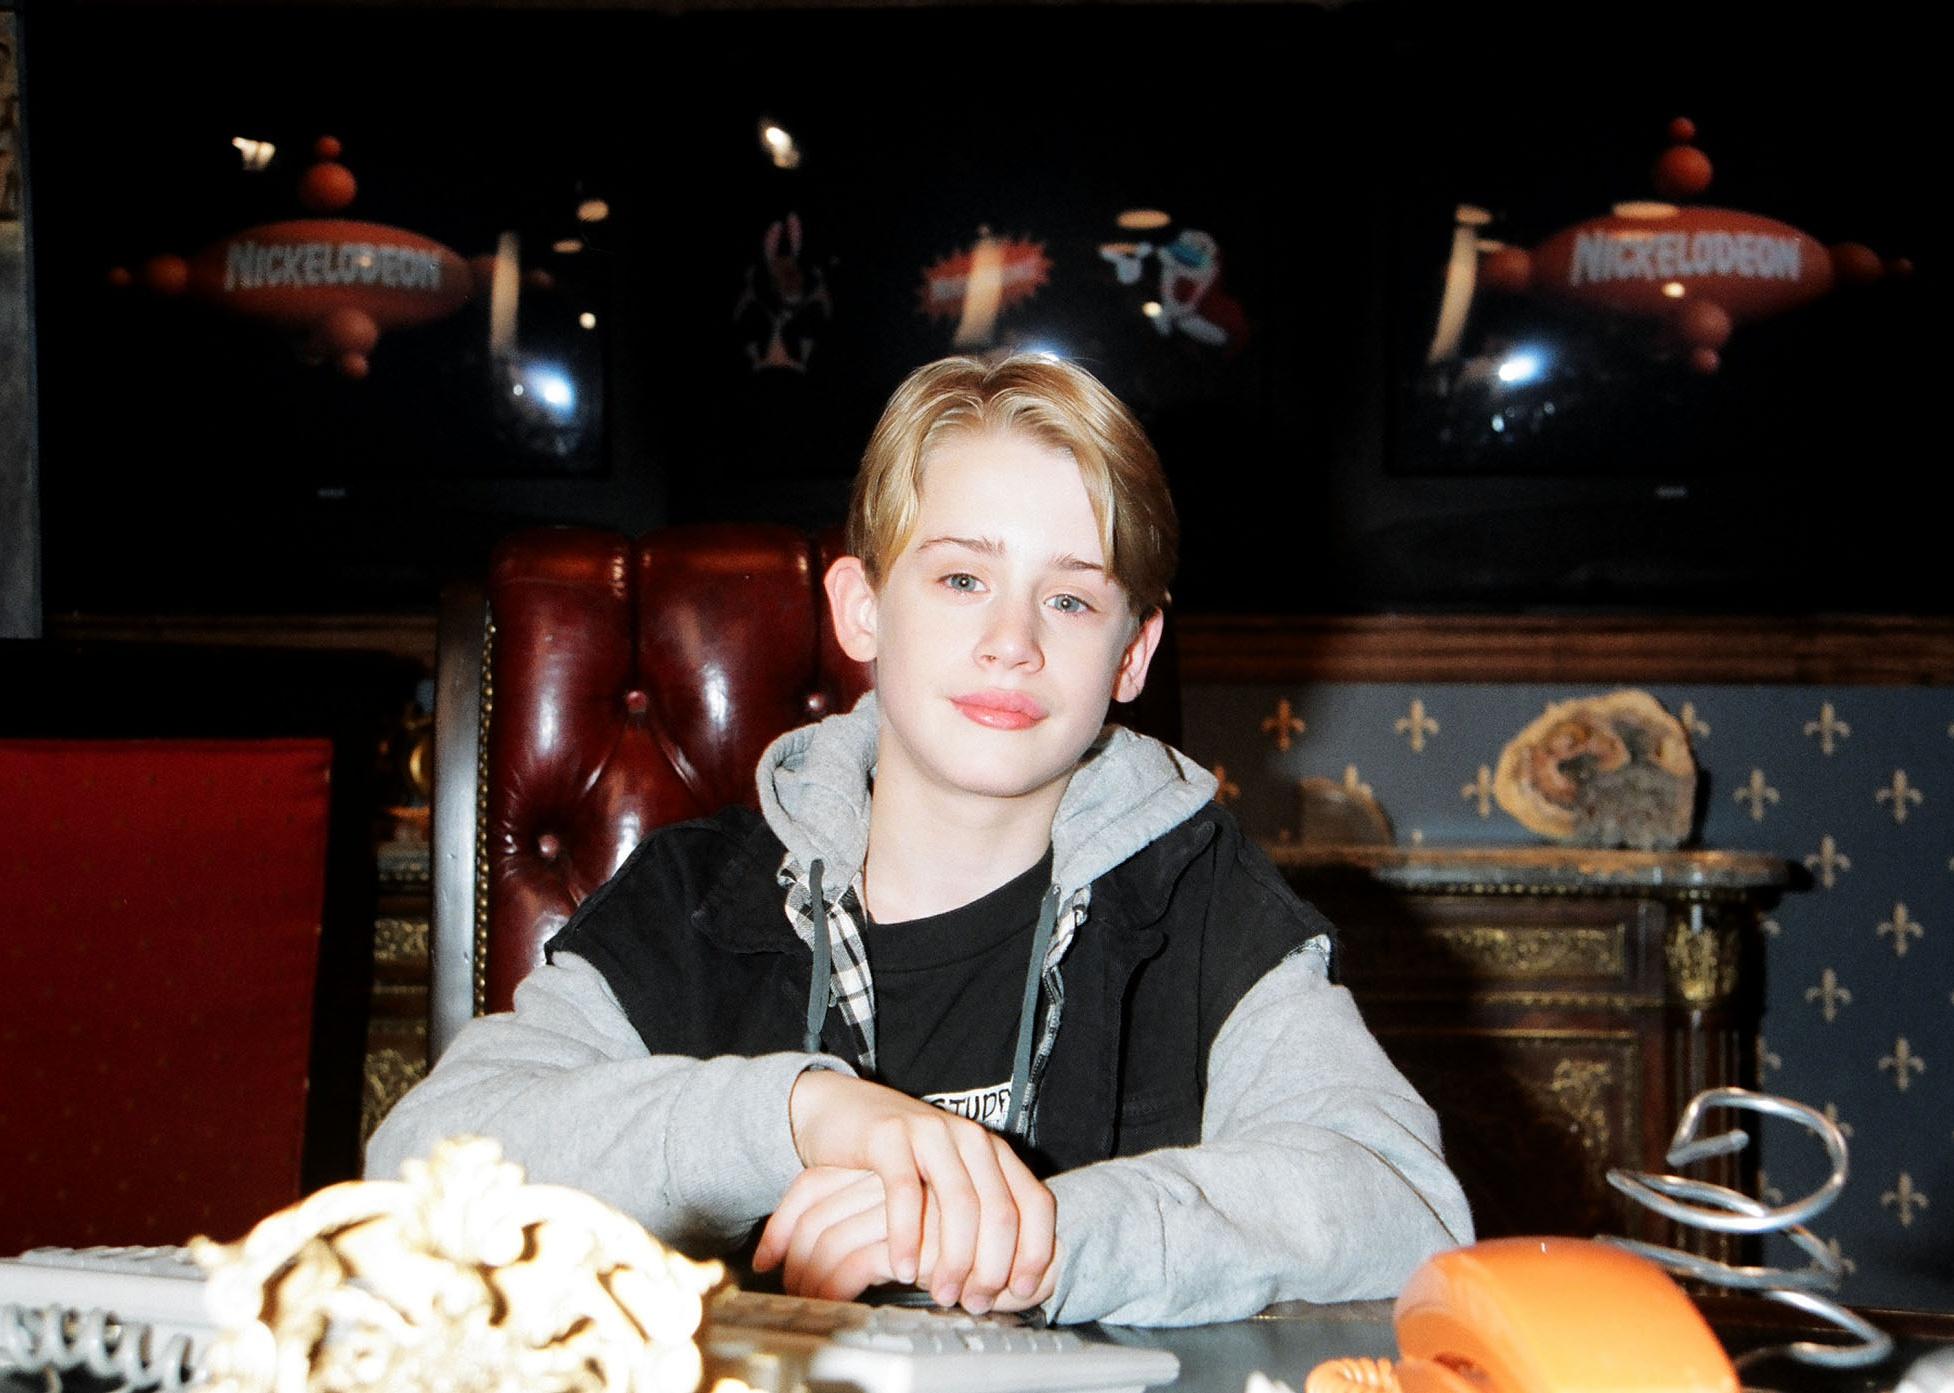 Young Macaulay Culkin sitting at a table at a Nickelodeon event.